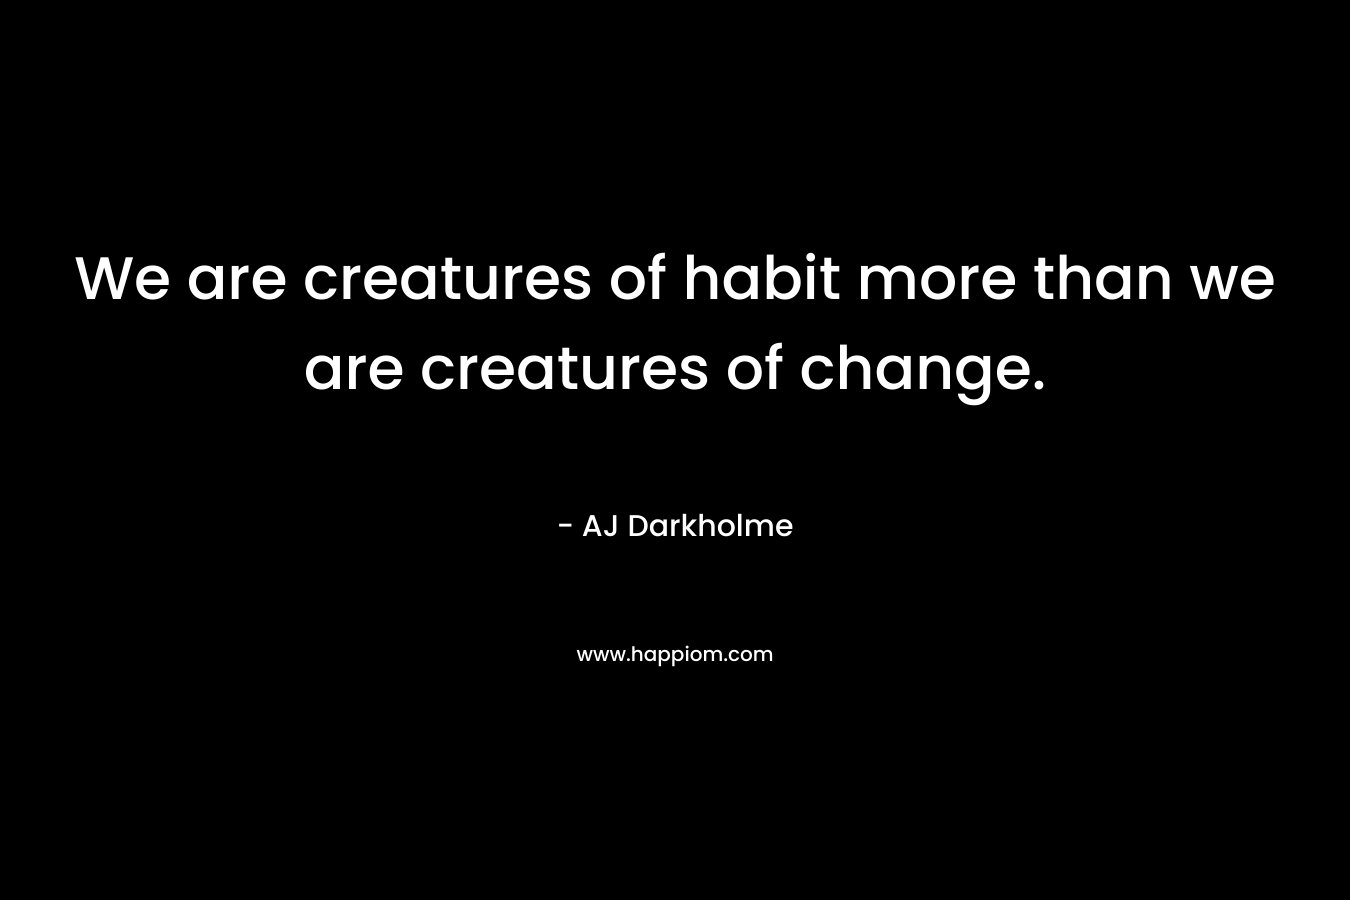 We are creatures of habit more than we are creatures of change.